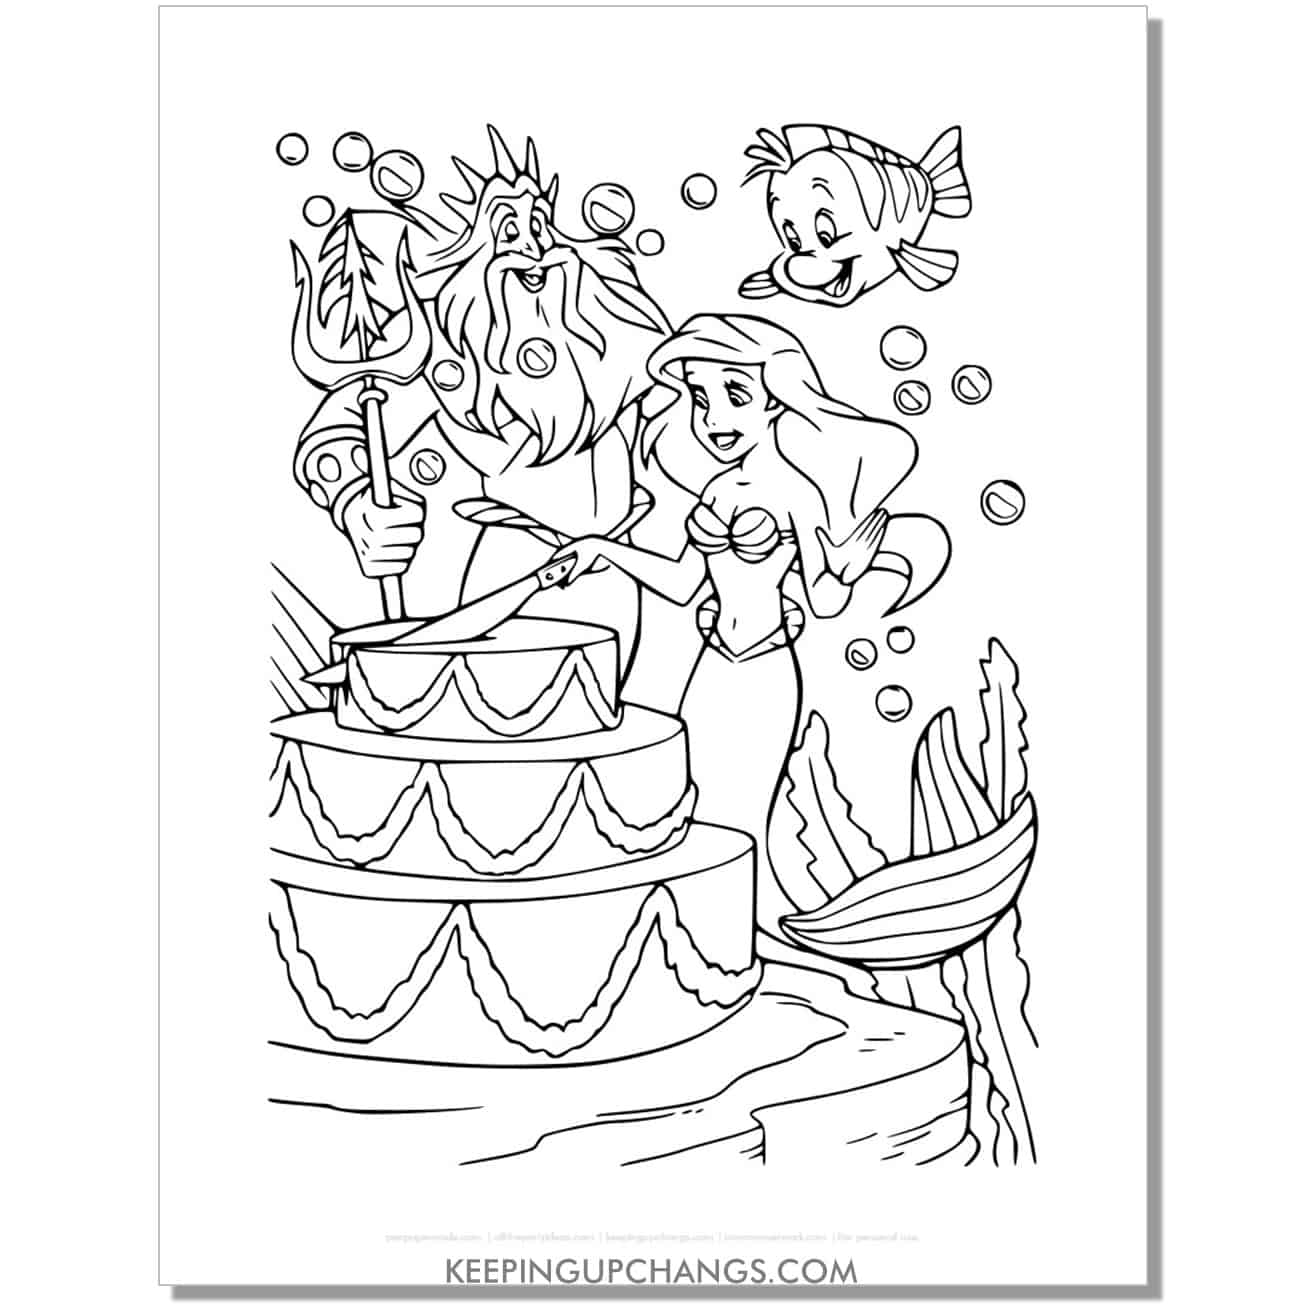 little mermaid ariel cuts wedding cake with king triton coloring page, sheet.